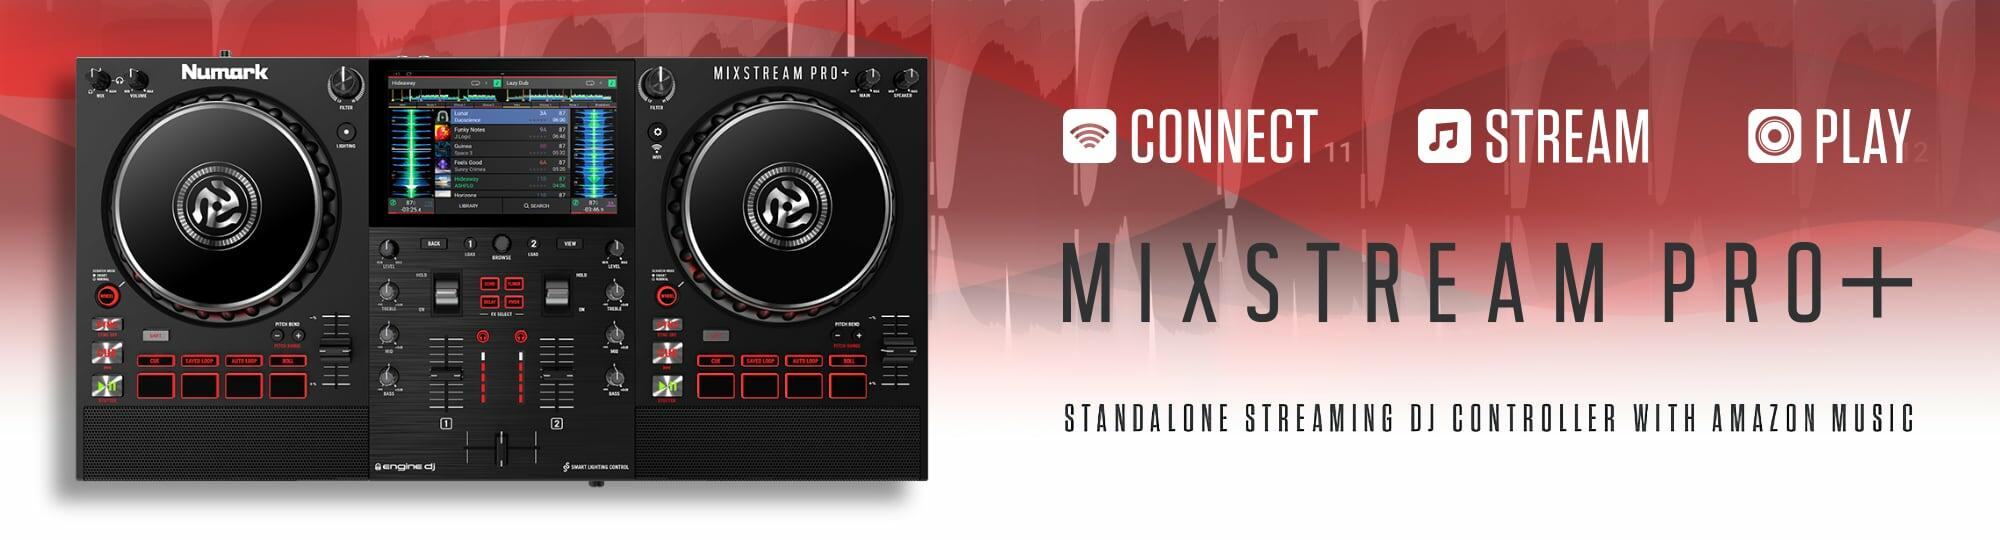 Mixstream Pro + Standalone Streaming DJ Controller with Amazon Music